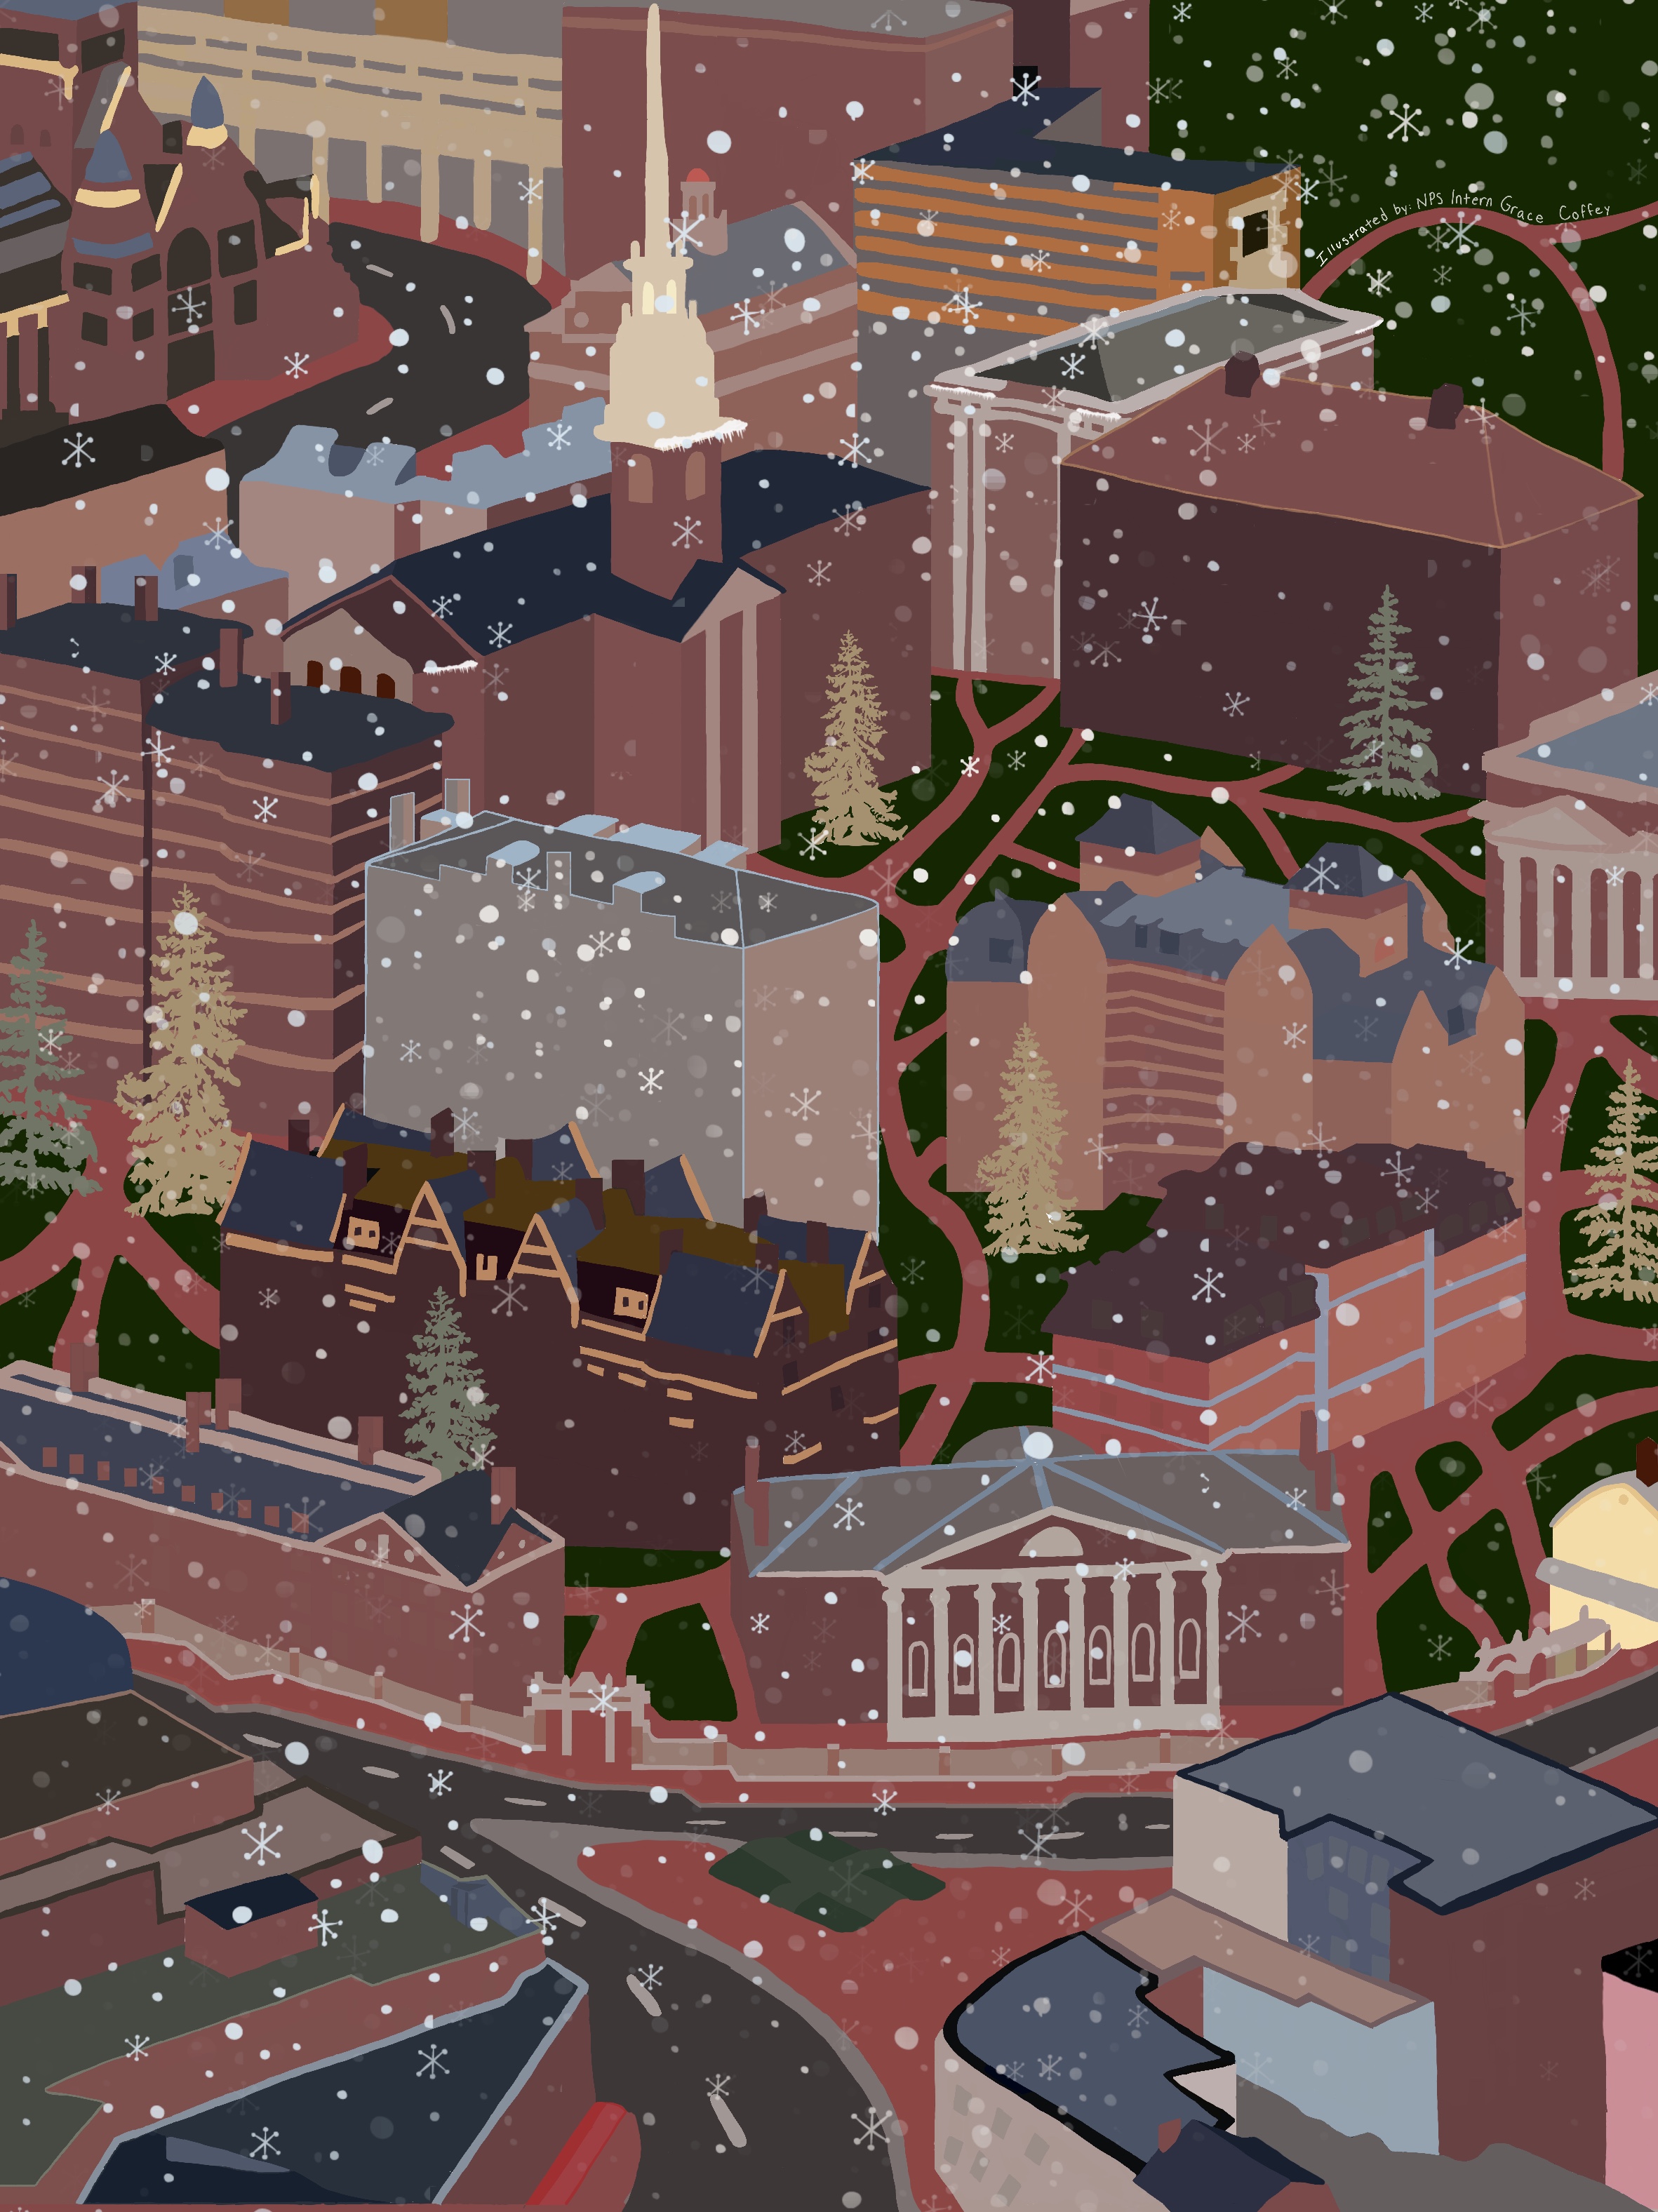 Illustration of Harvard Square building from above, with snowflakes falling